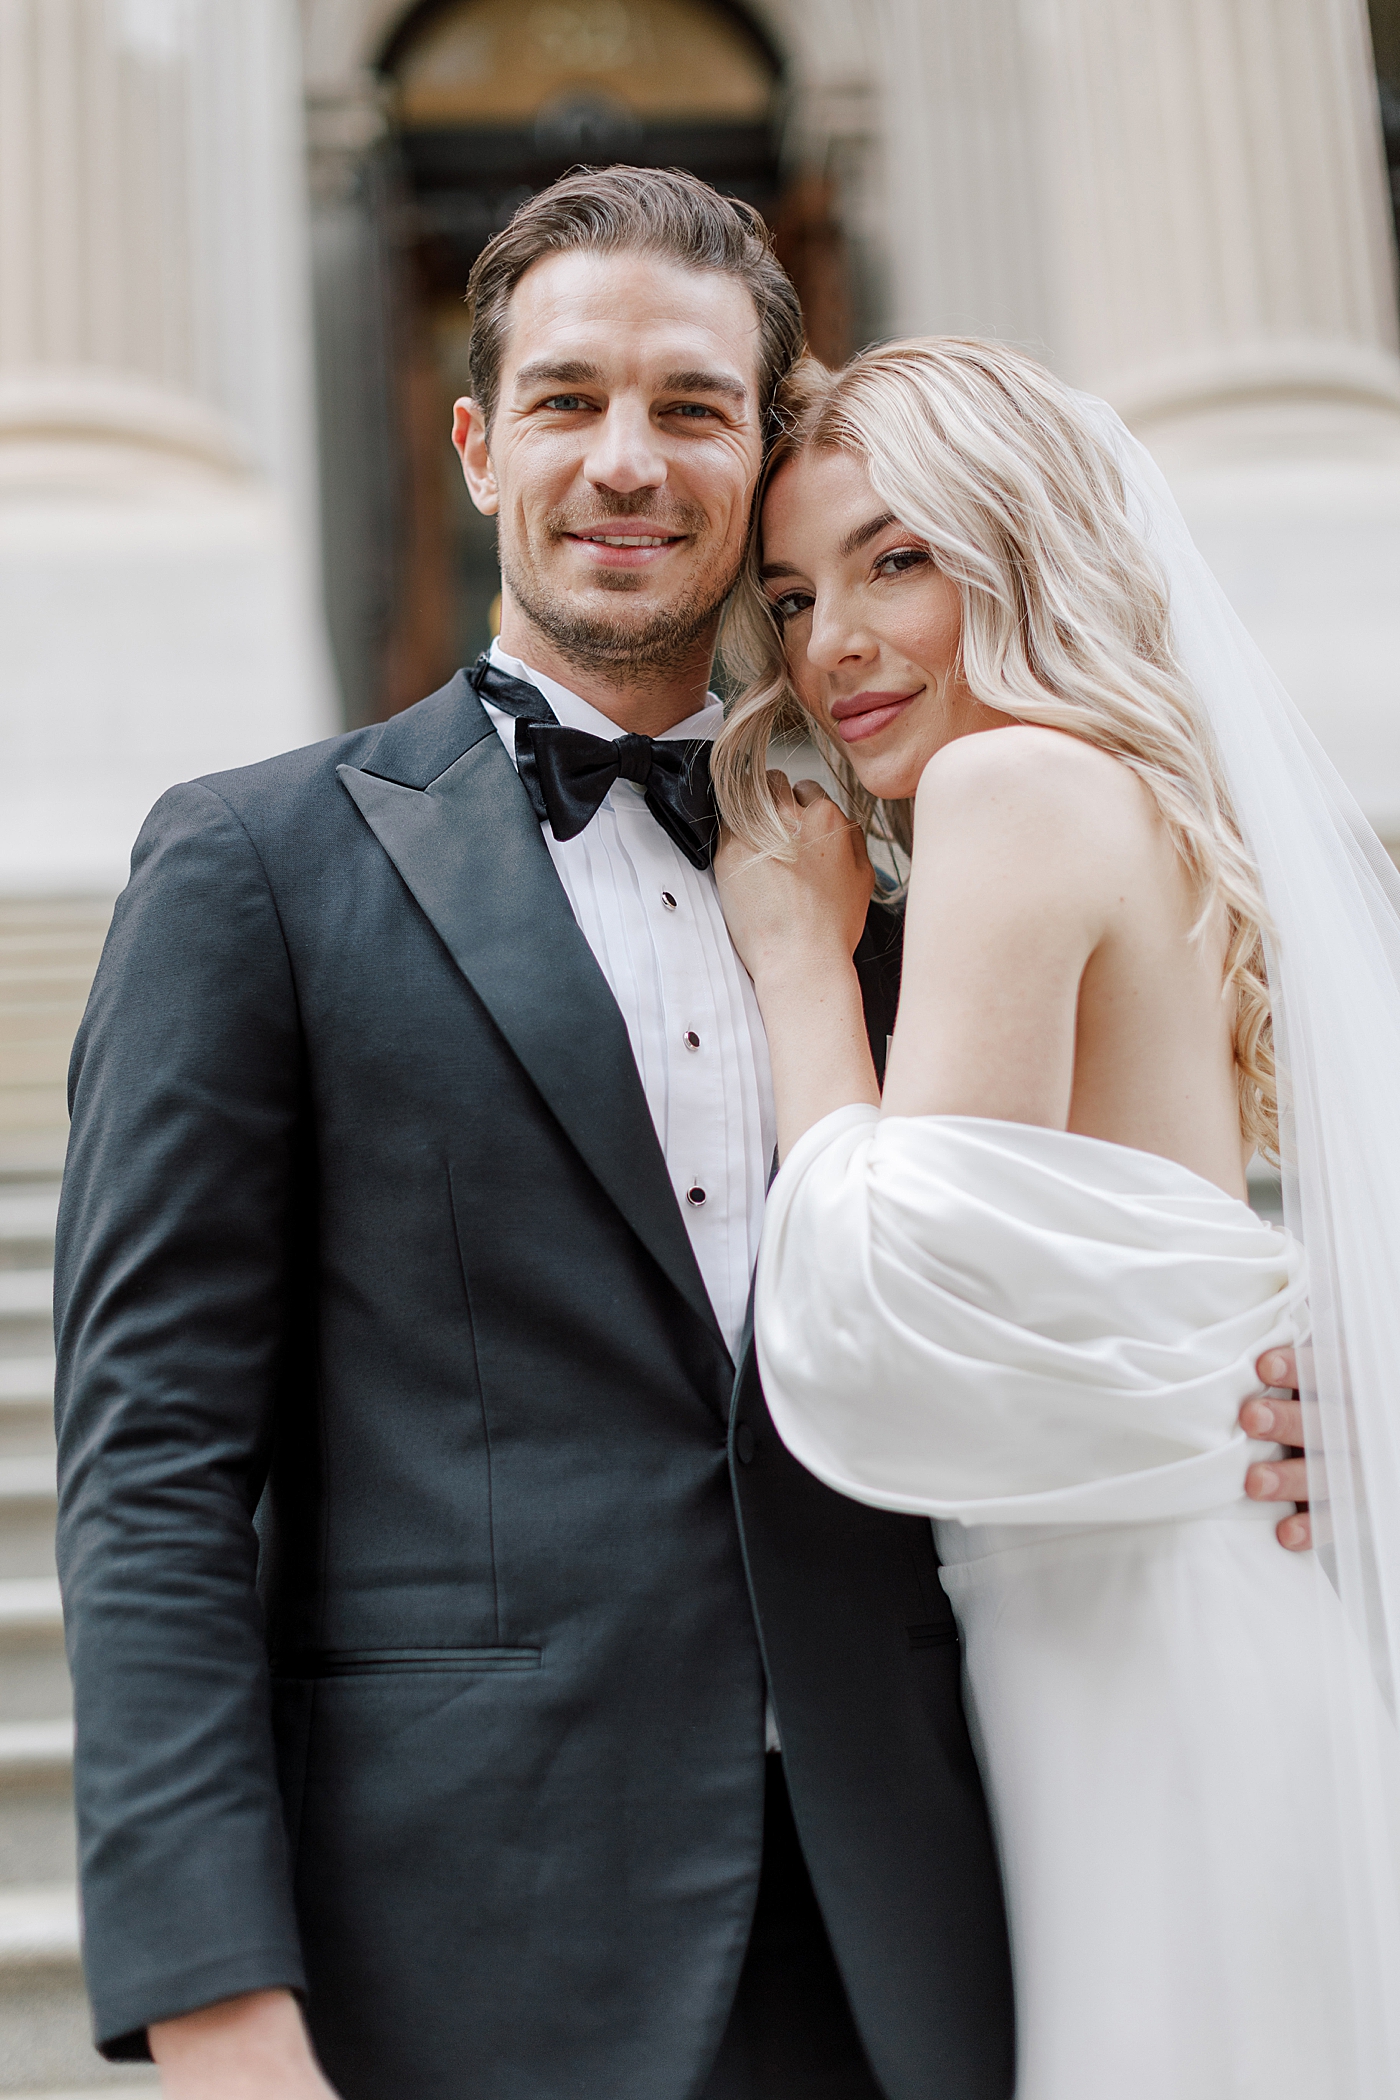 Bride and groom portraits in downtown NYC | Photo by Hope Helmuth Photography